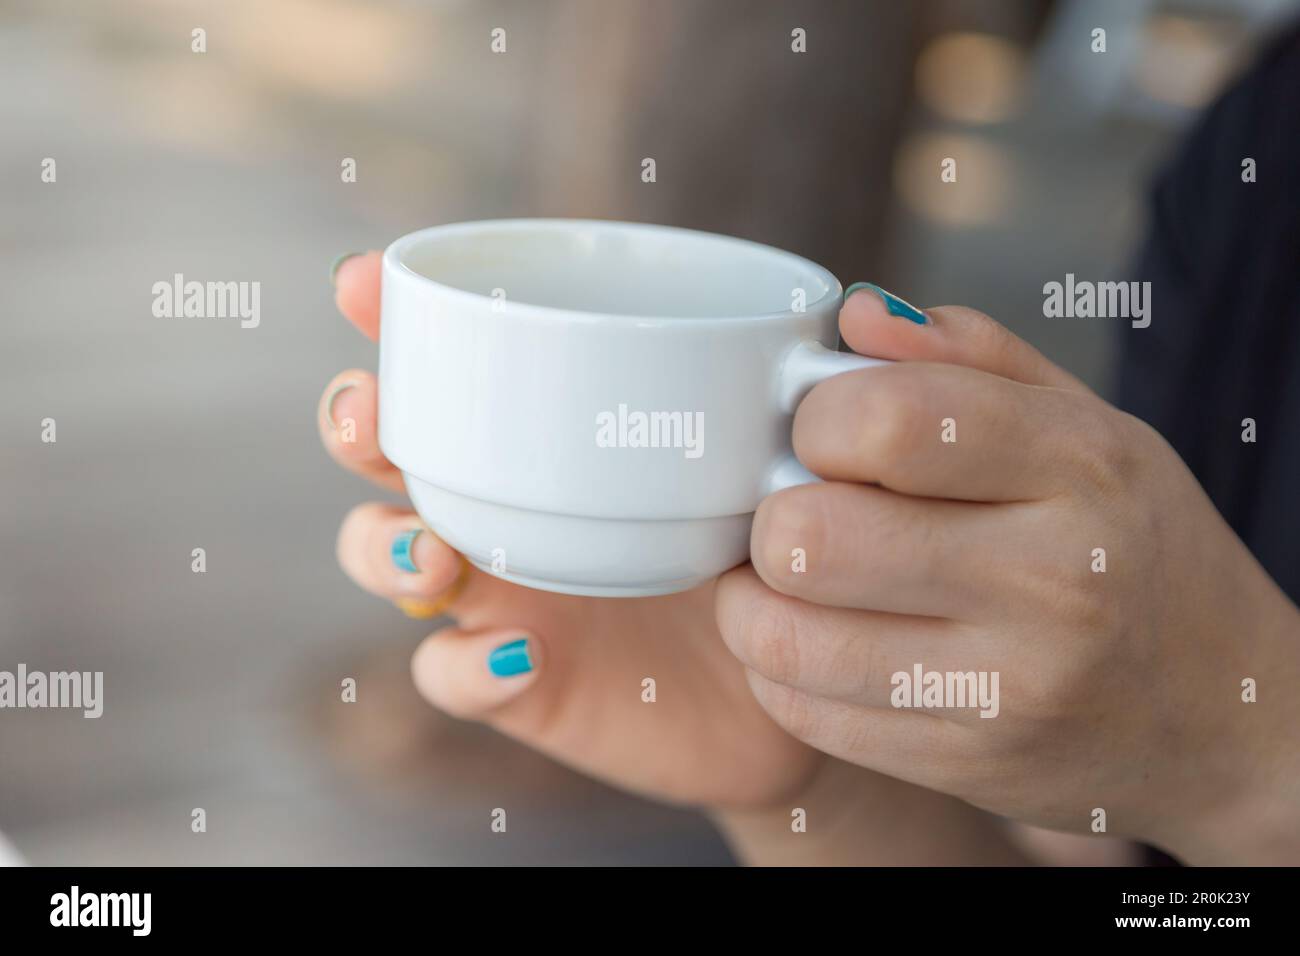 Woman drinking coffee in hand with blur baclground Stock Photo